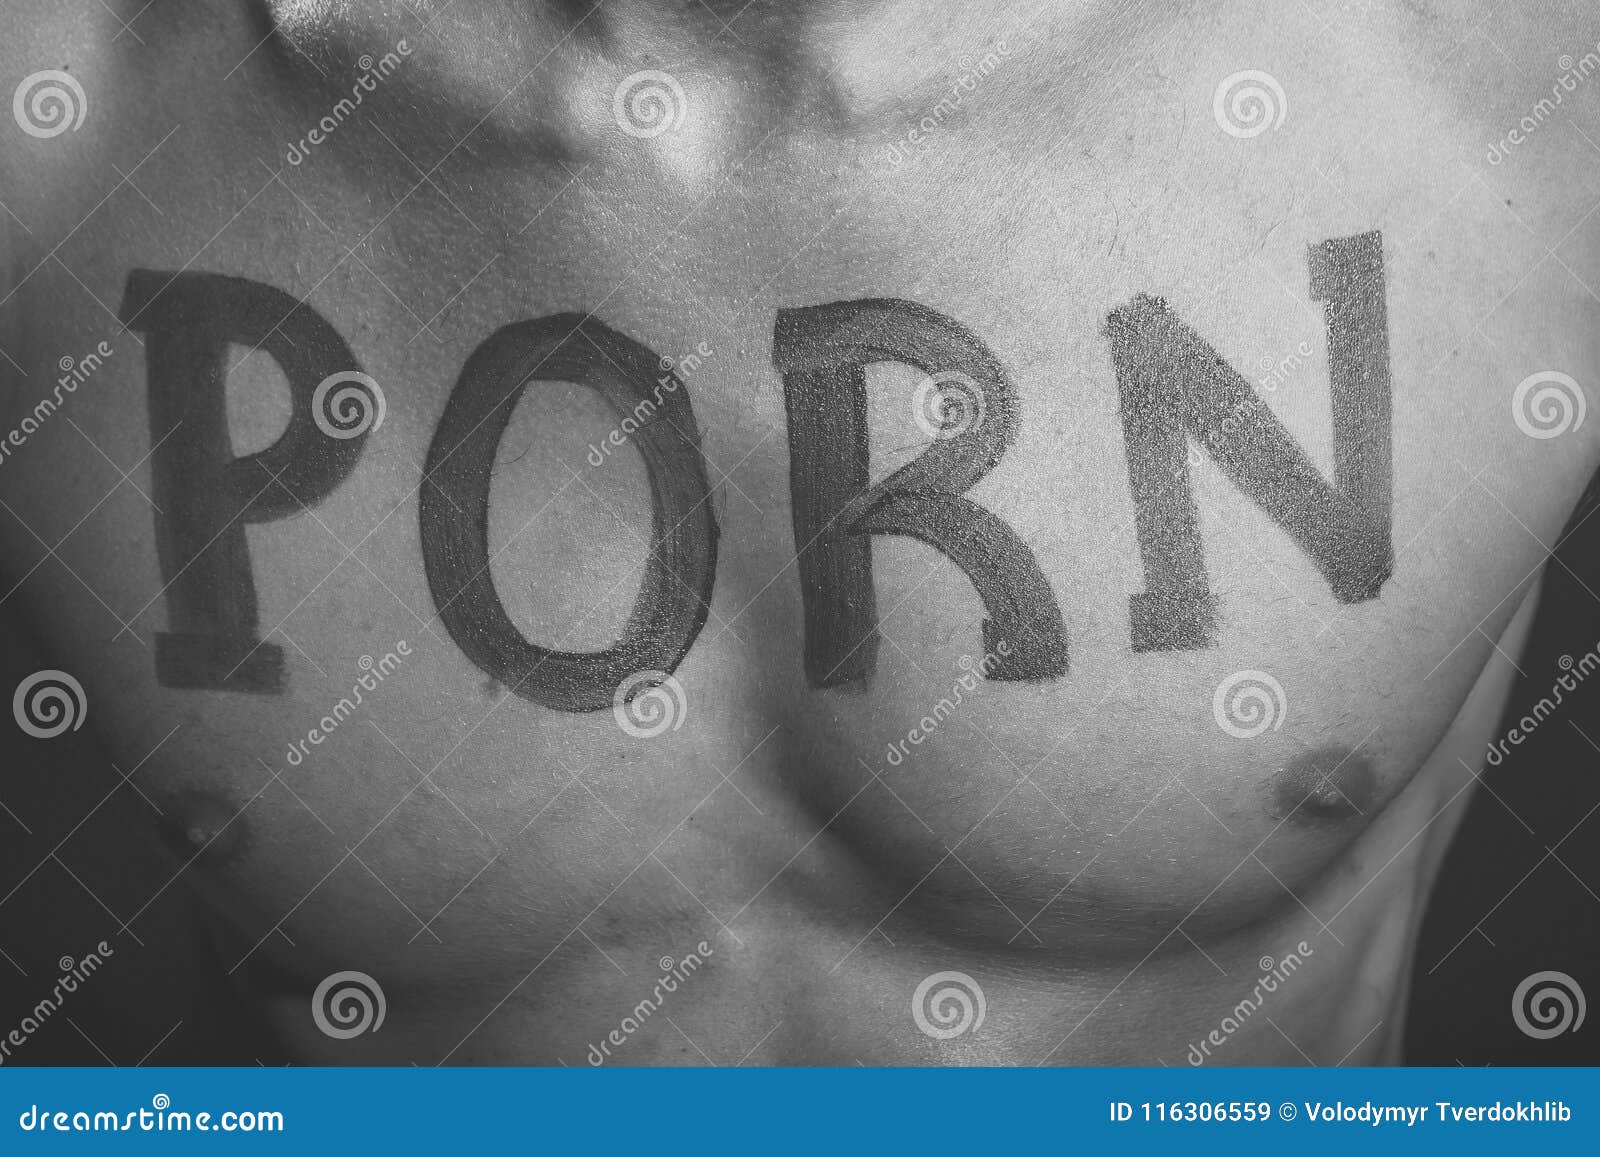 Porntext Xxx - Male chest with text stock image. Image of body, abdominal - 116306559